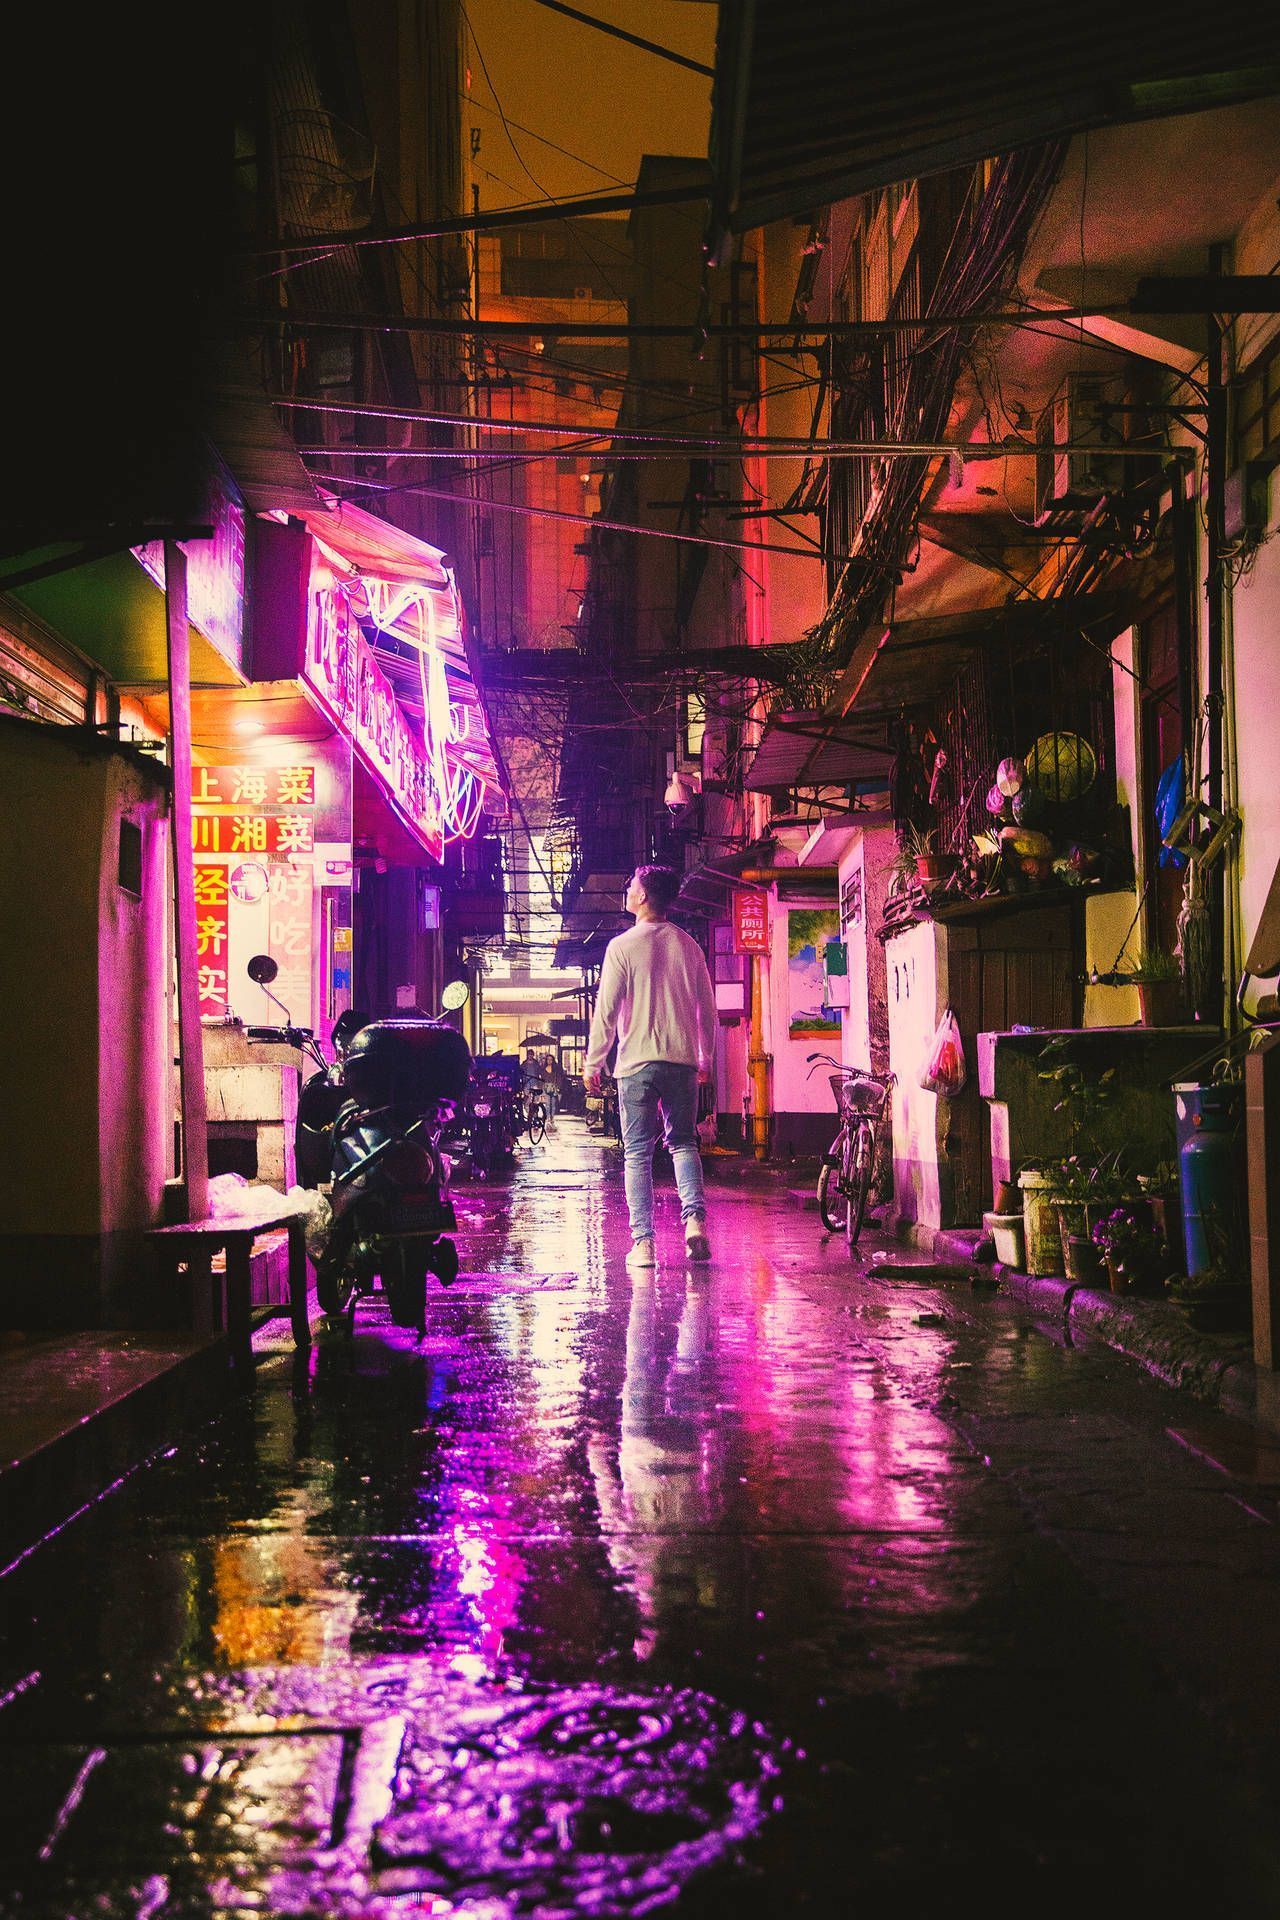 A person walking down a street at night with neon lights - Chinese